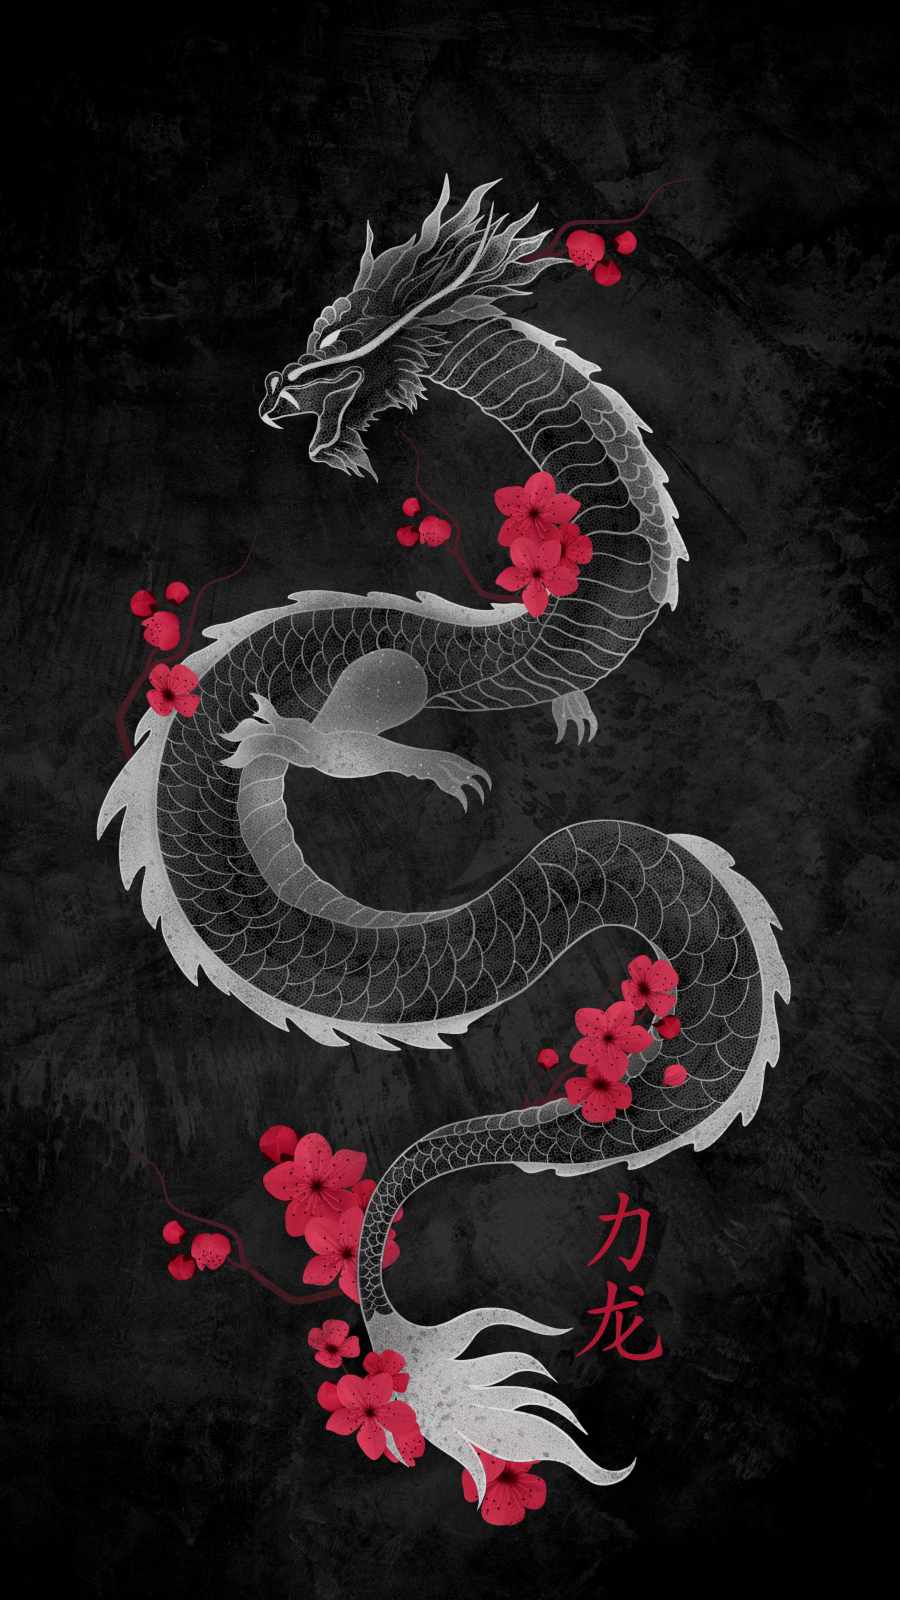 Black Dragon - IPhone Wallpapers : iPhone Wallpapers